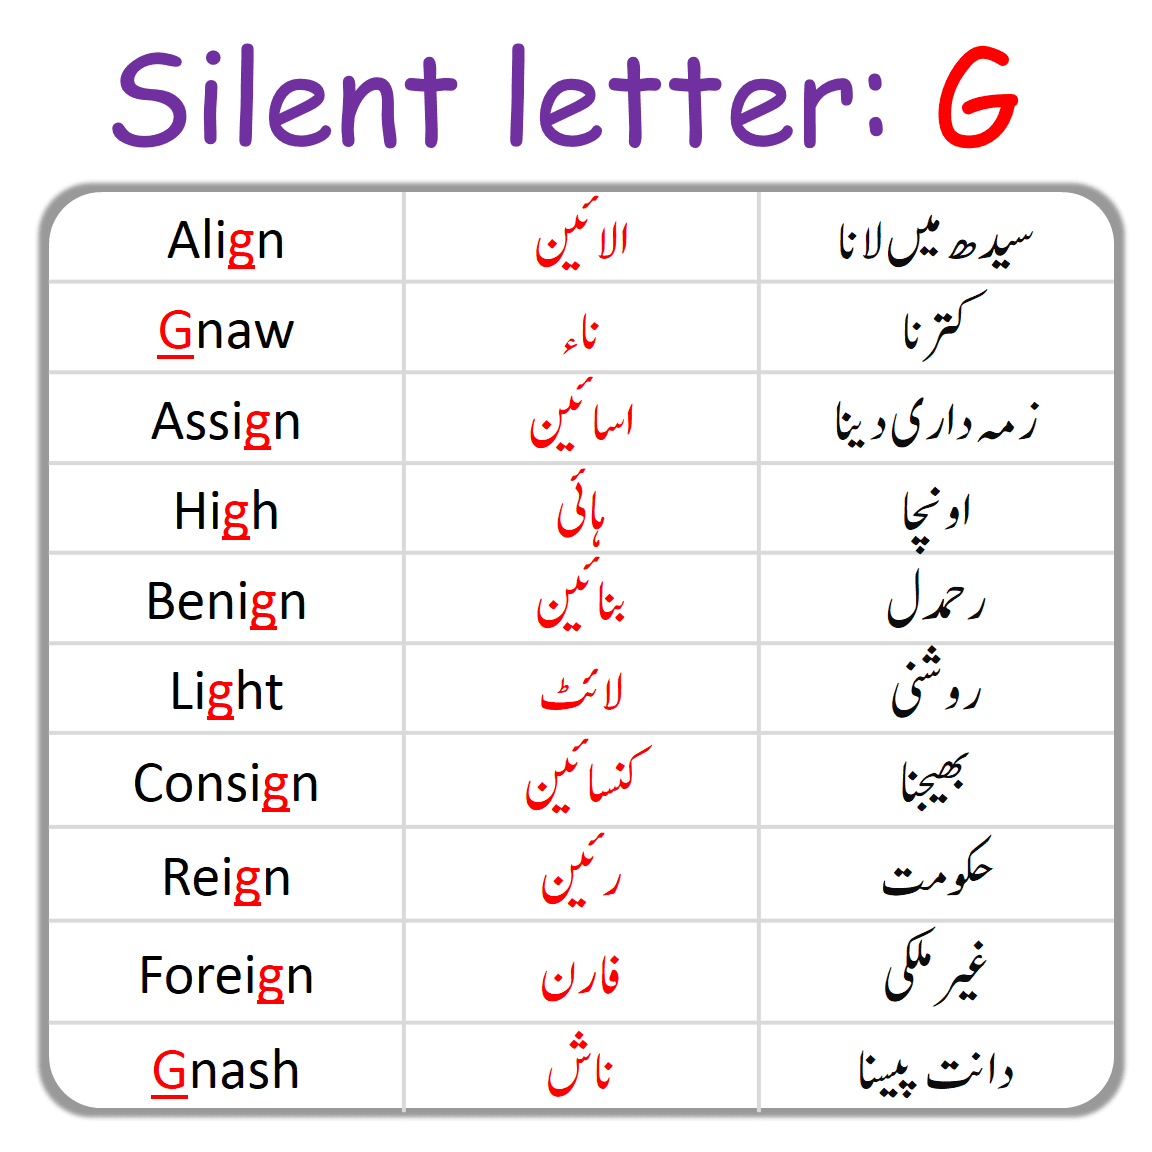 G Silent Letter in English with Urdu Examples